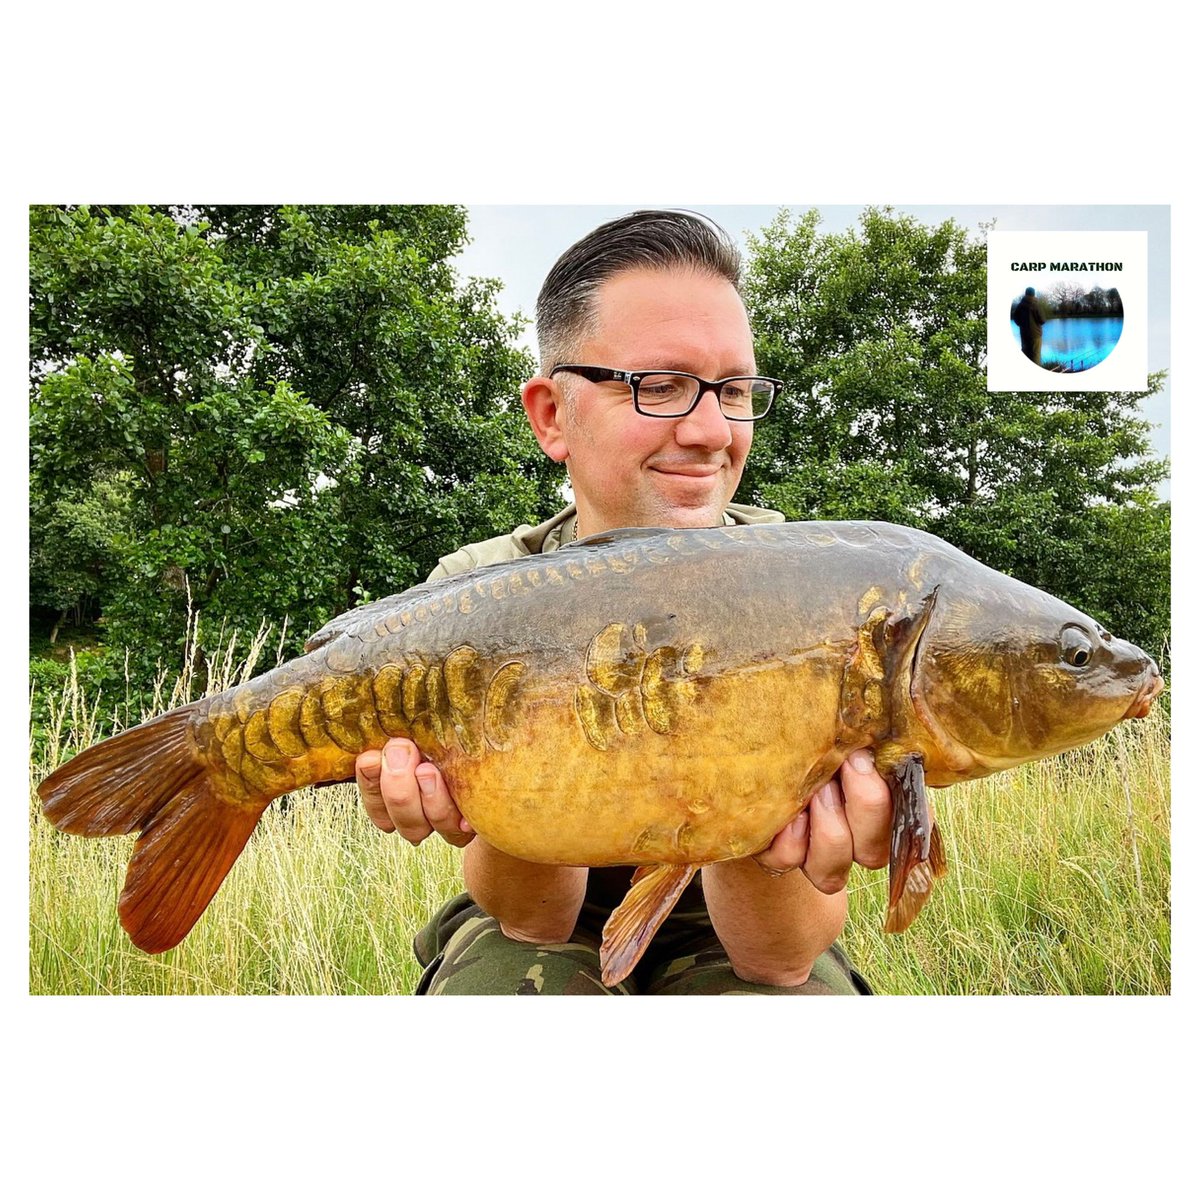 One of six surface caught carp

from this morning’s <b>Session</b> 

#CarpFishing https://t.co/7VI